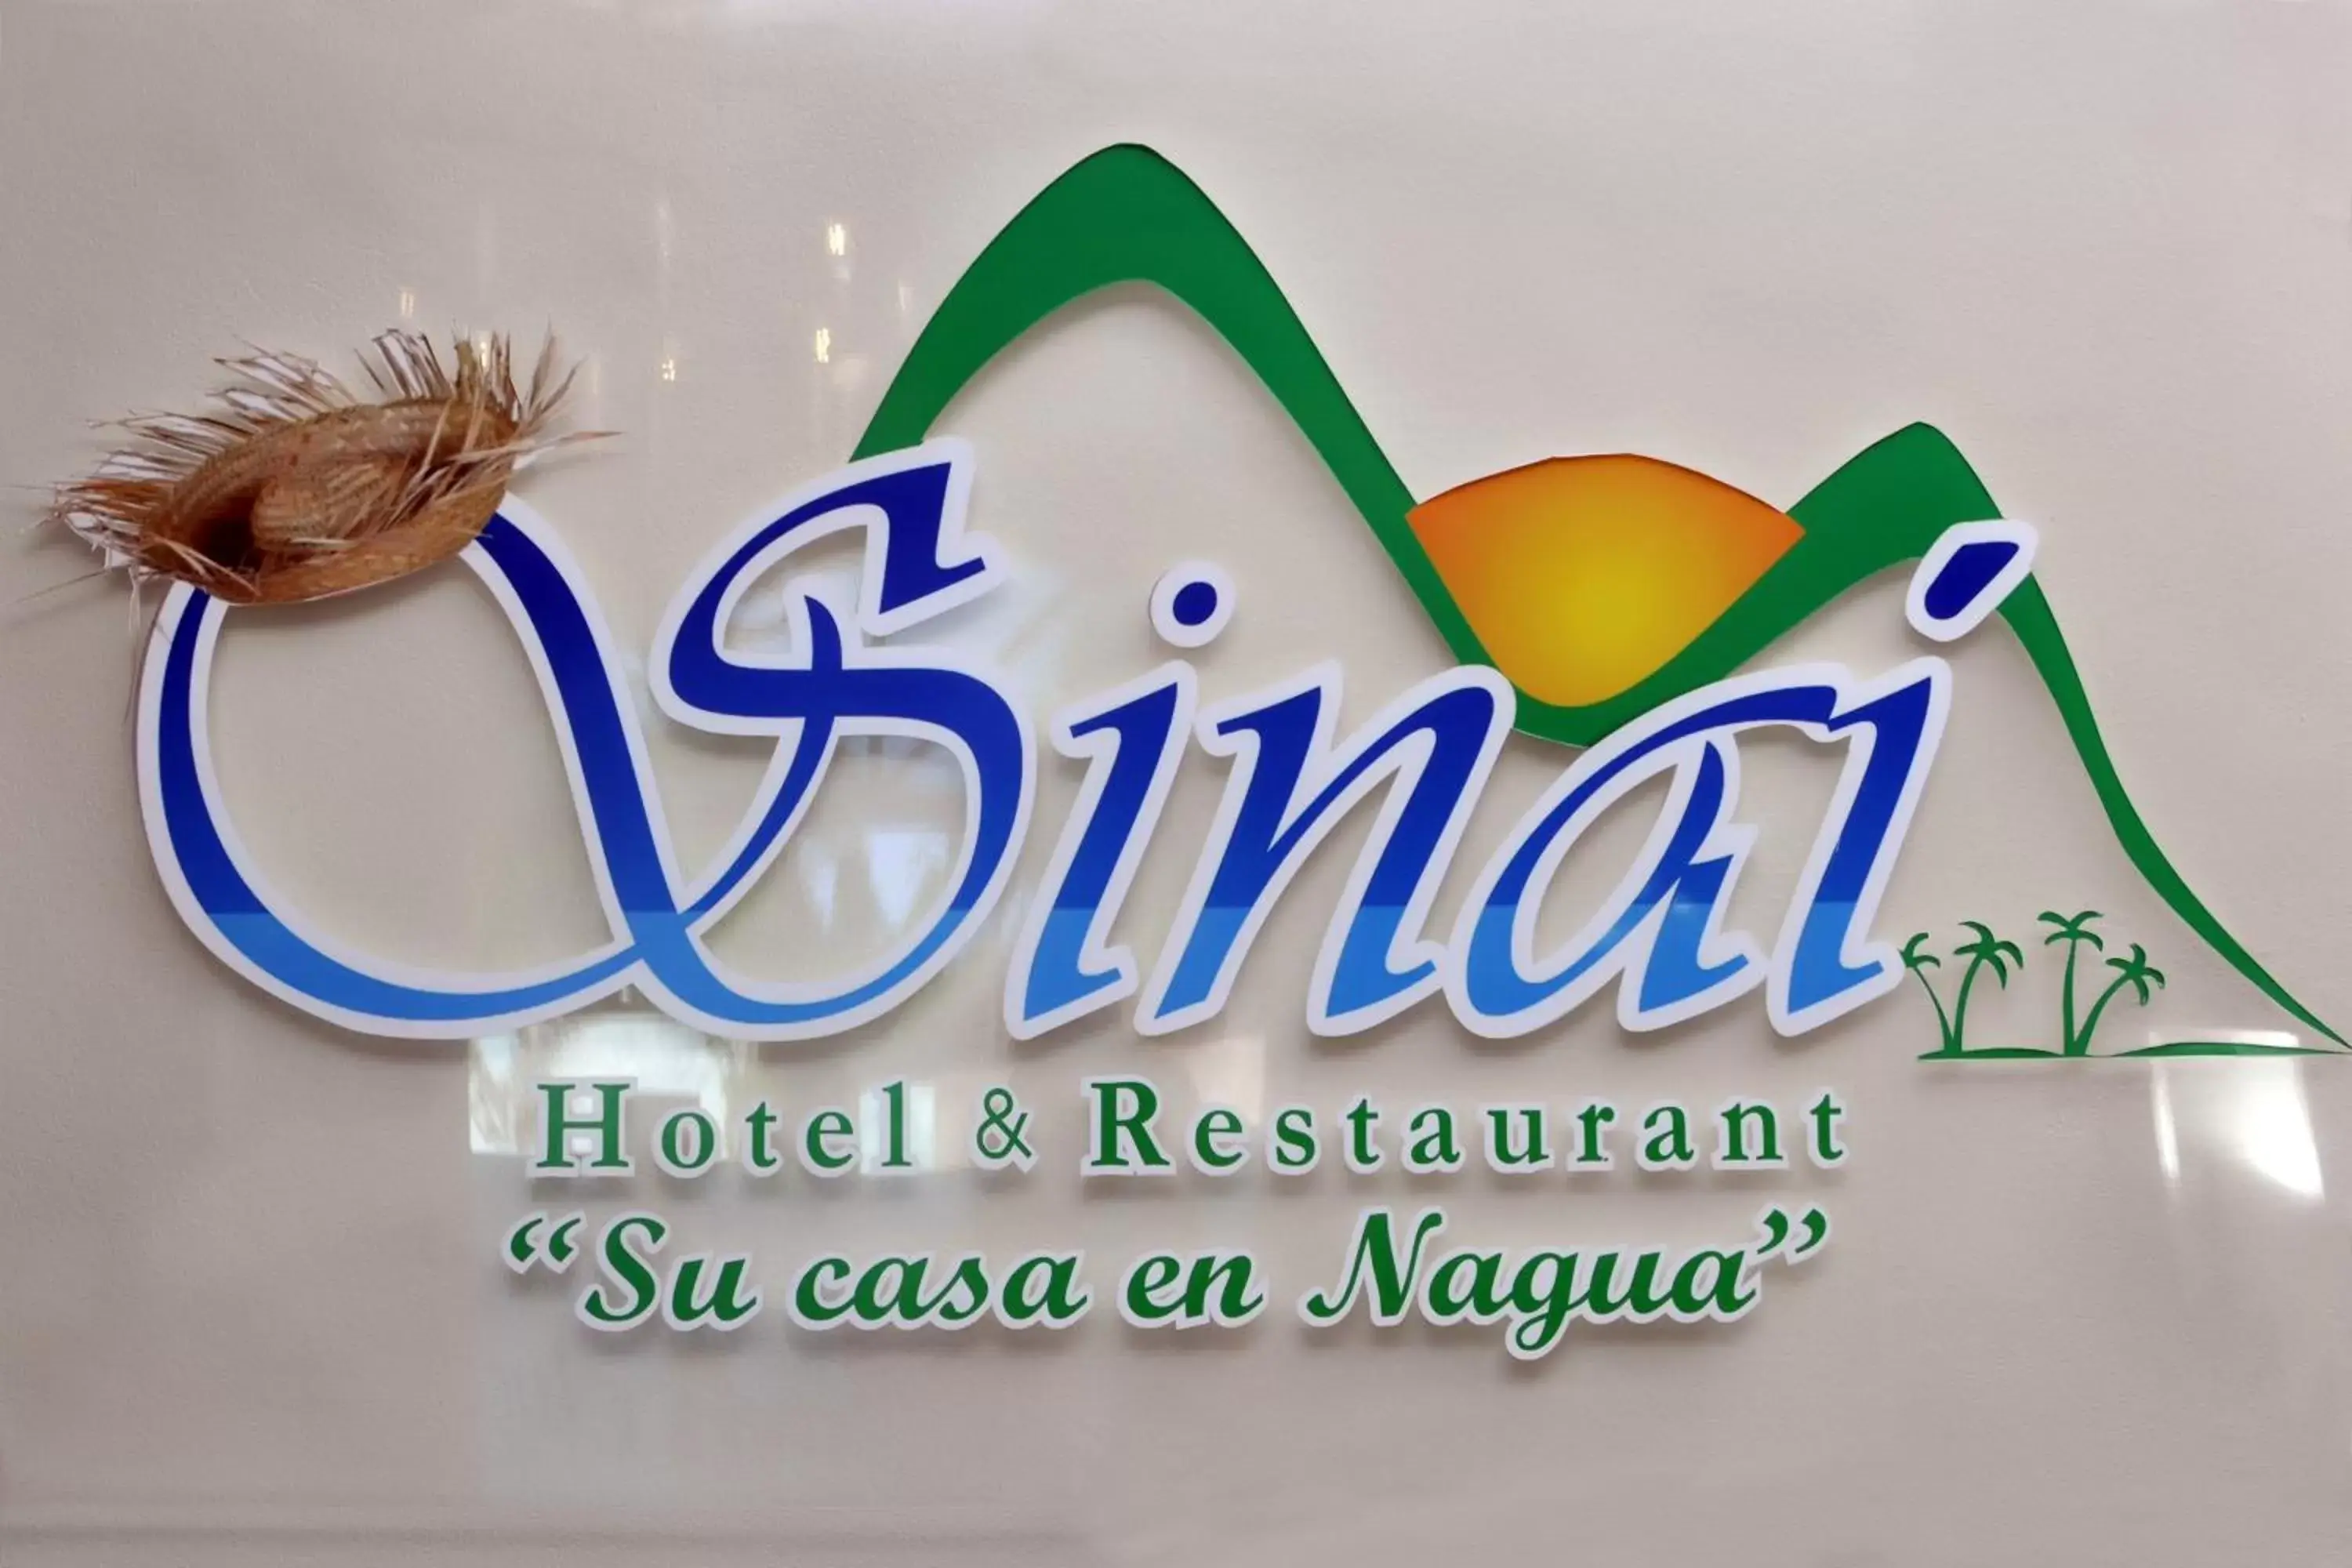 Property logo or sign in Hotel Sinai